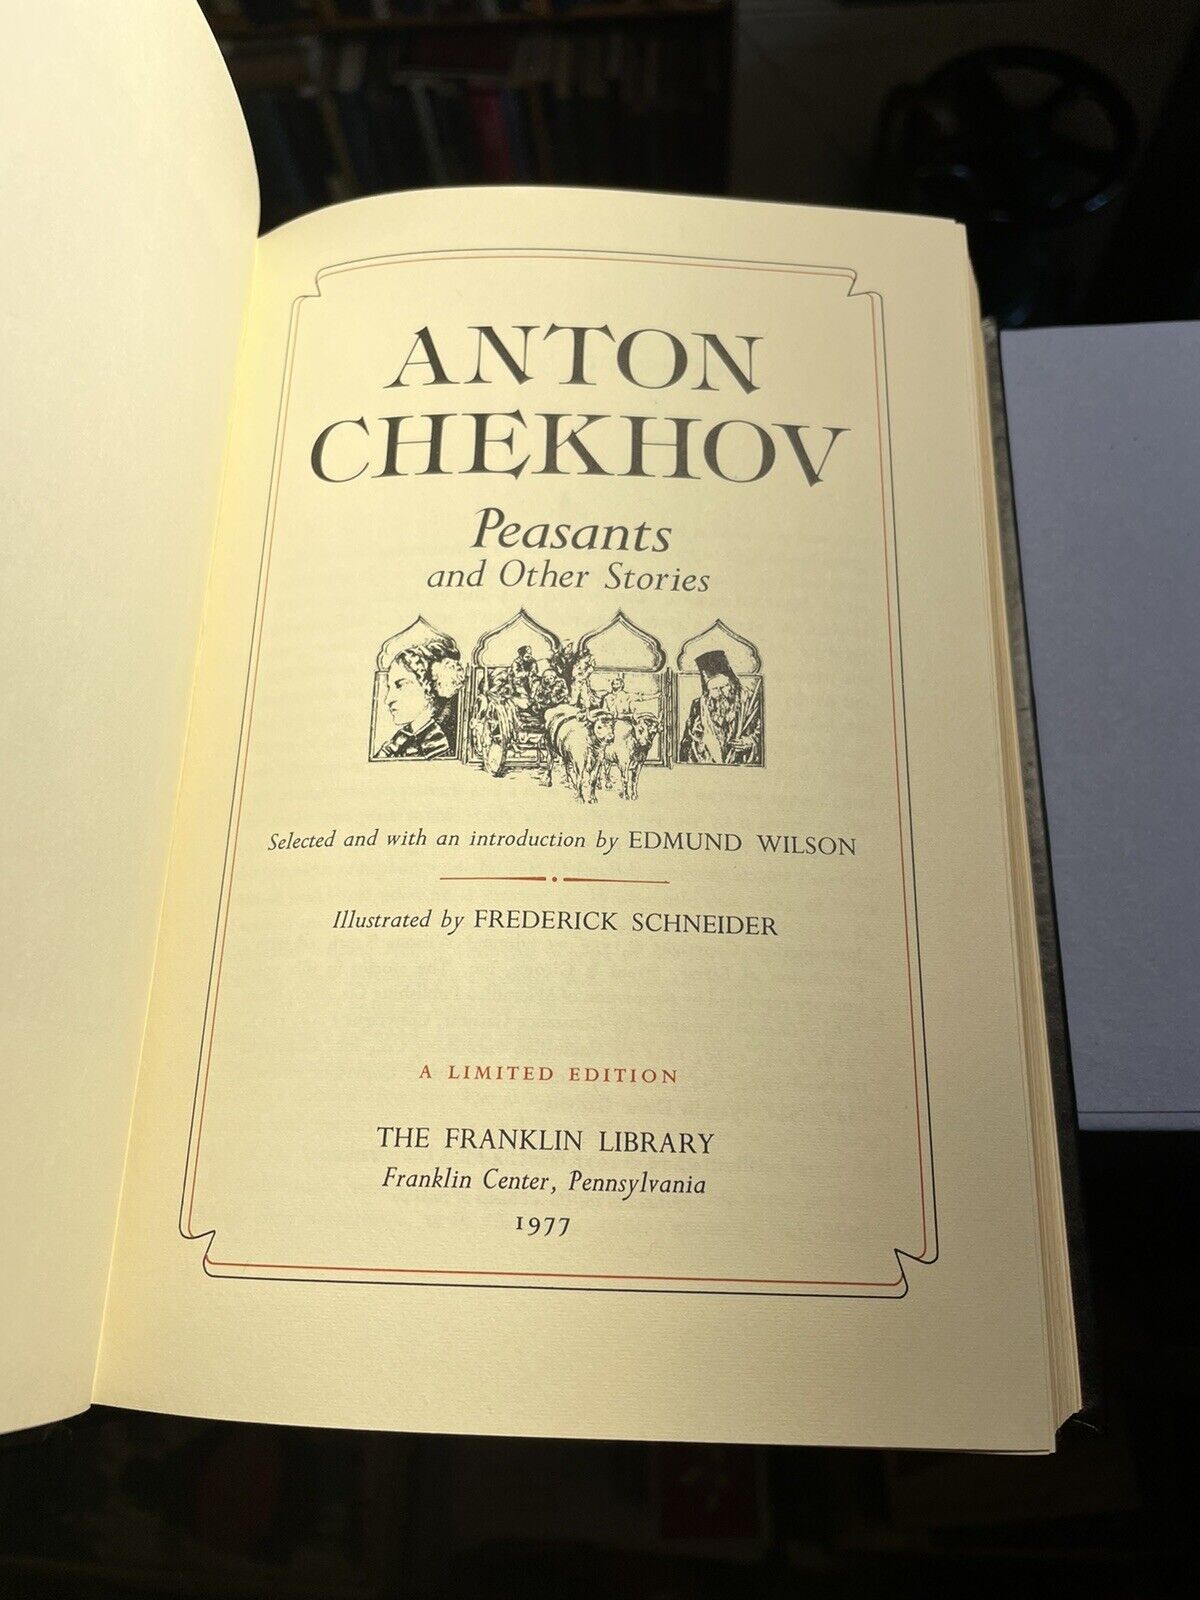 Anton Chekhov : Peasants and Other Stories : The Franklin Library : Leather Ltd